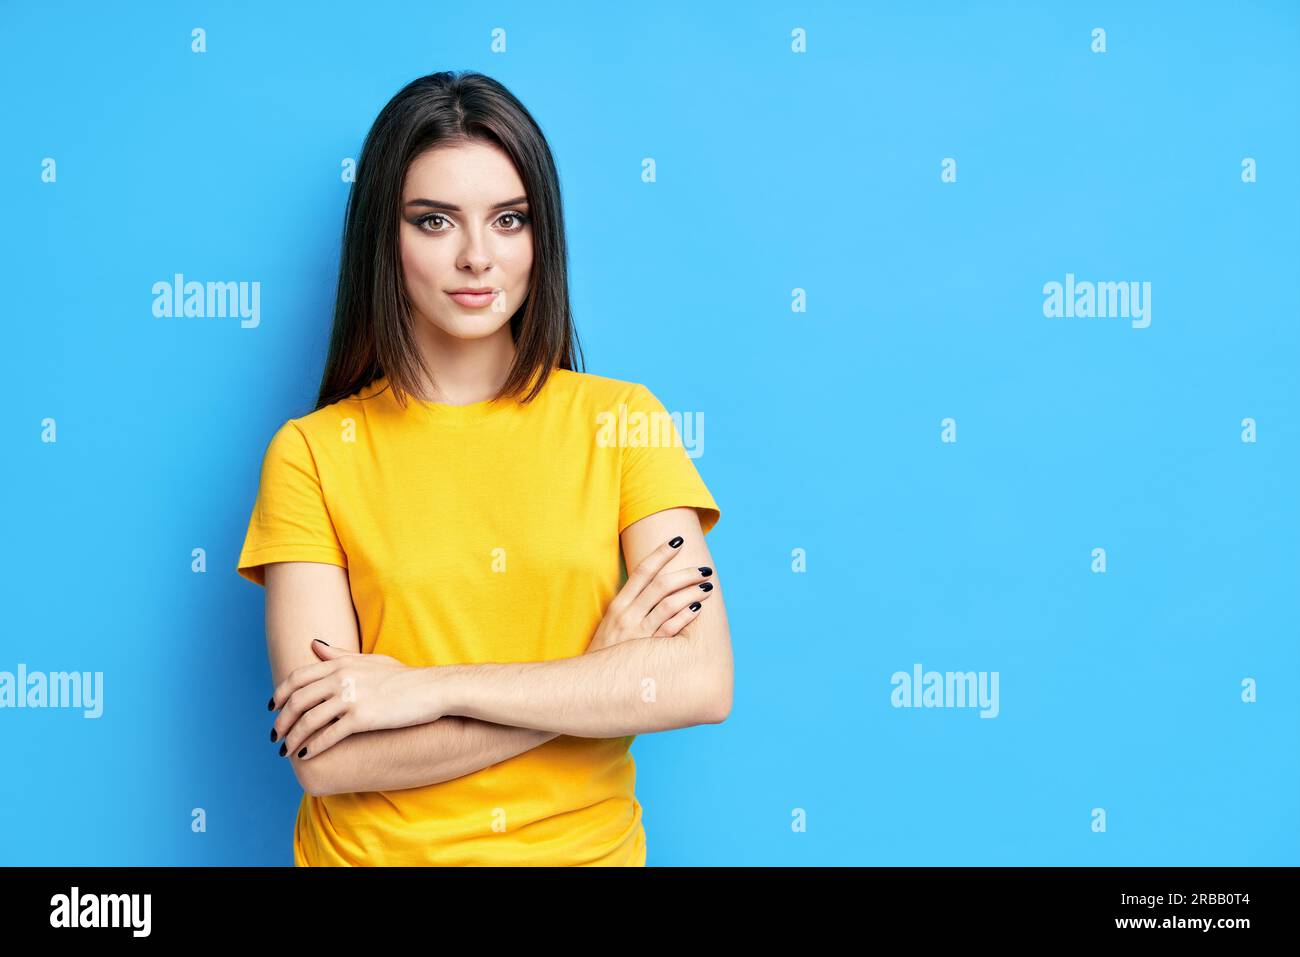 Pretty confident young beautiful woman in casual clothing with crossed arms looking at camera over blue background Stock Photo